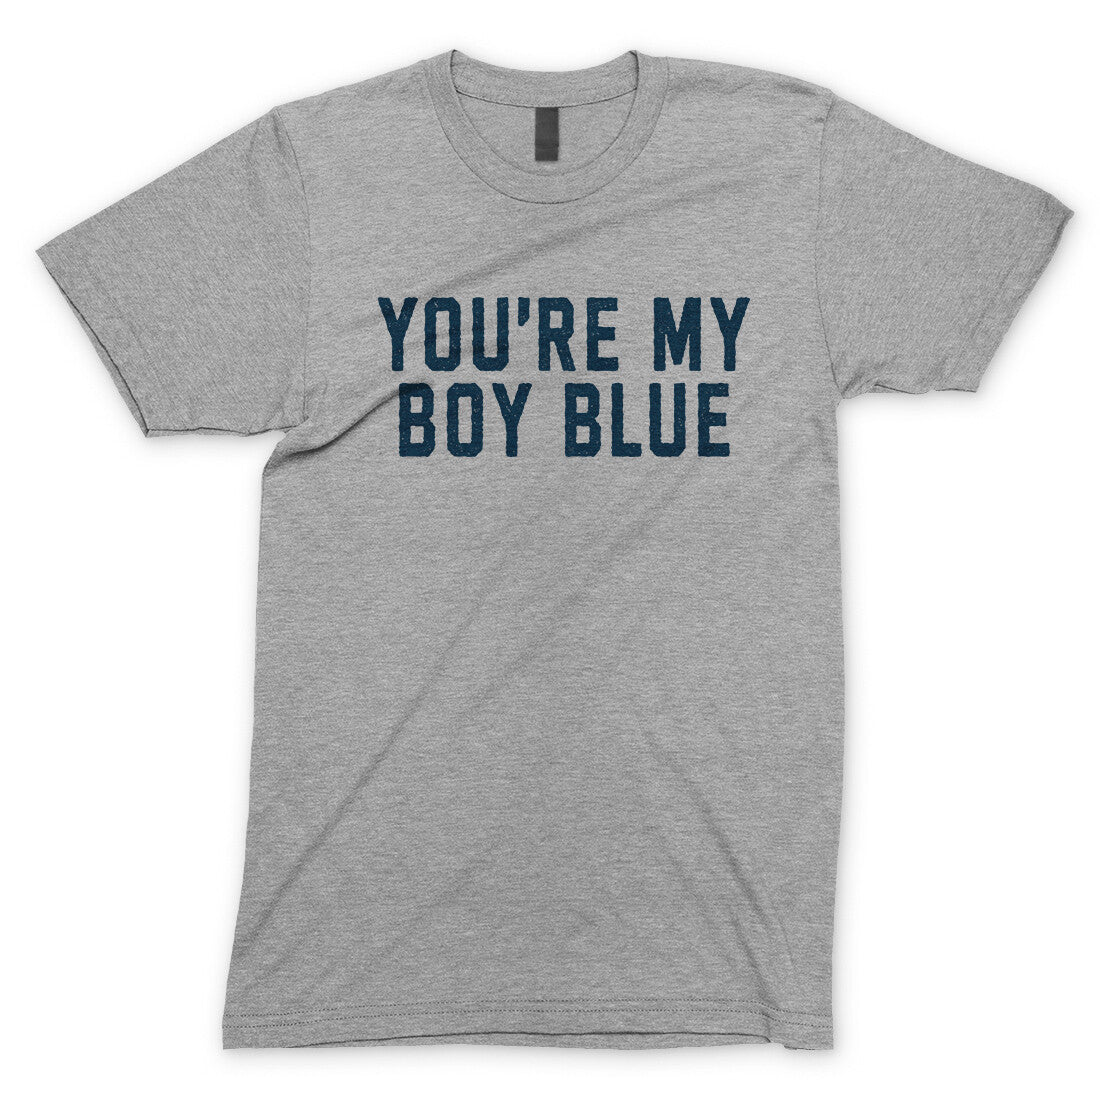 You're my Boy Blue in Sport Grey Color